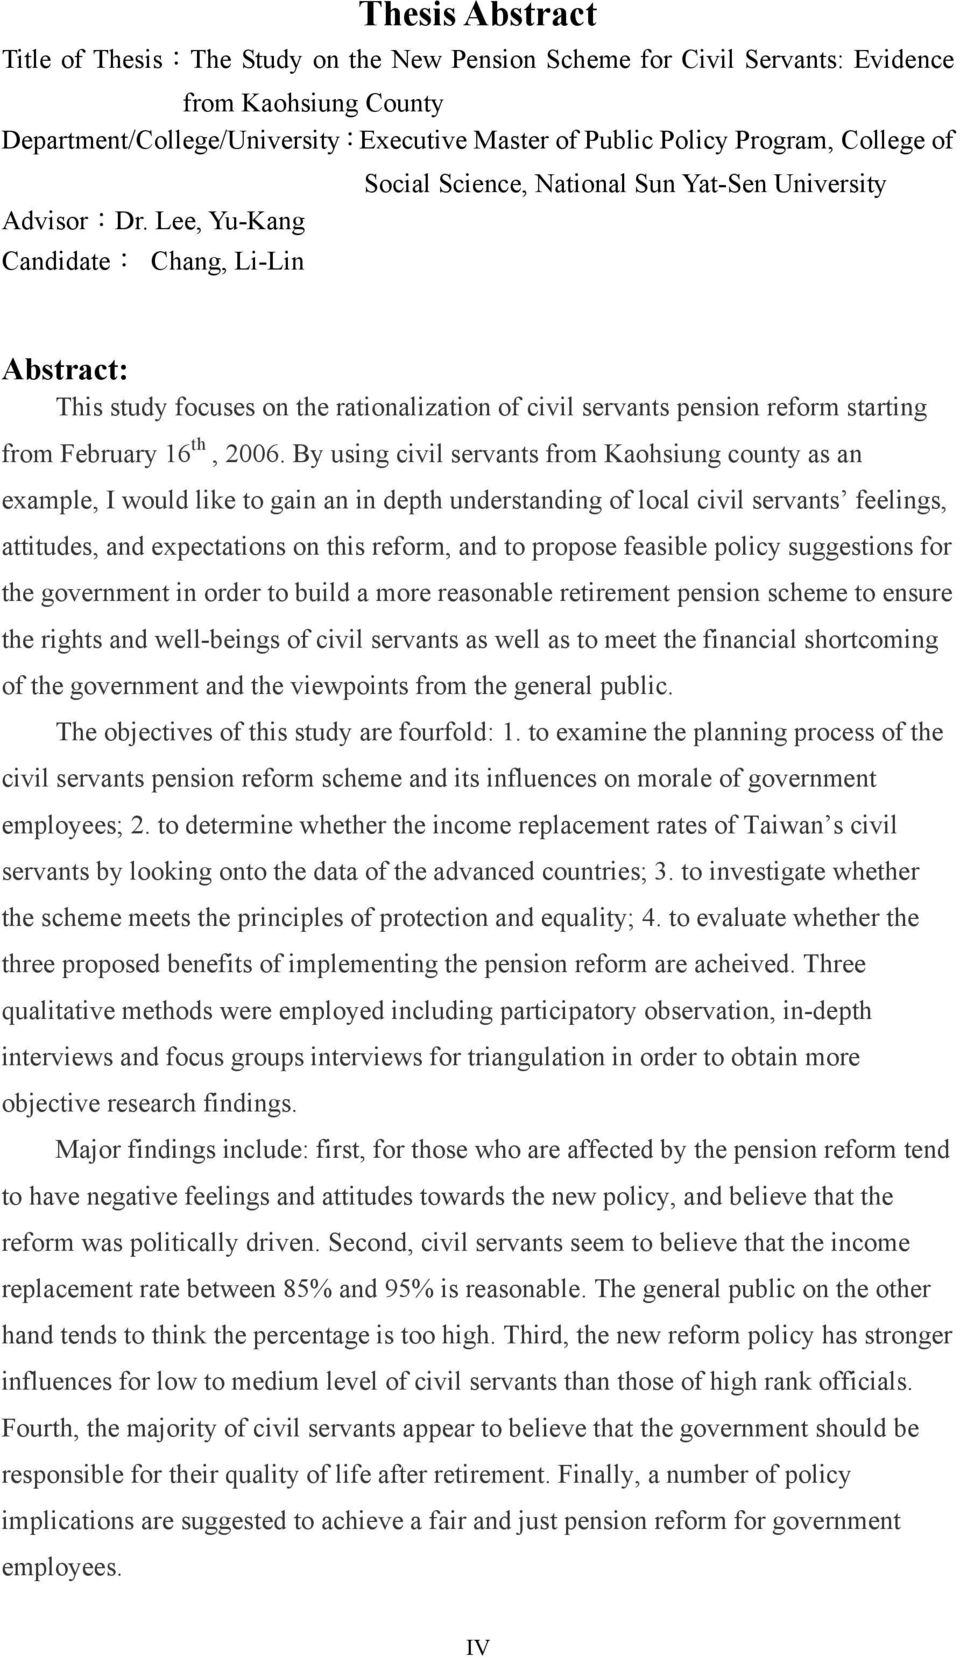 Lee, Yu-Kang CandidateChang, Li-Lin Abstract: This study focuses on the rationalization of civil servants pension reform starting from February 16 th, 2006.